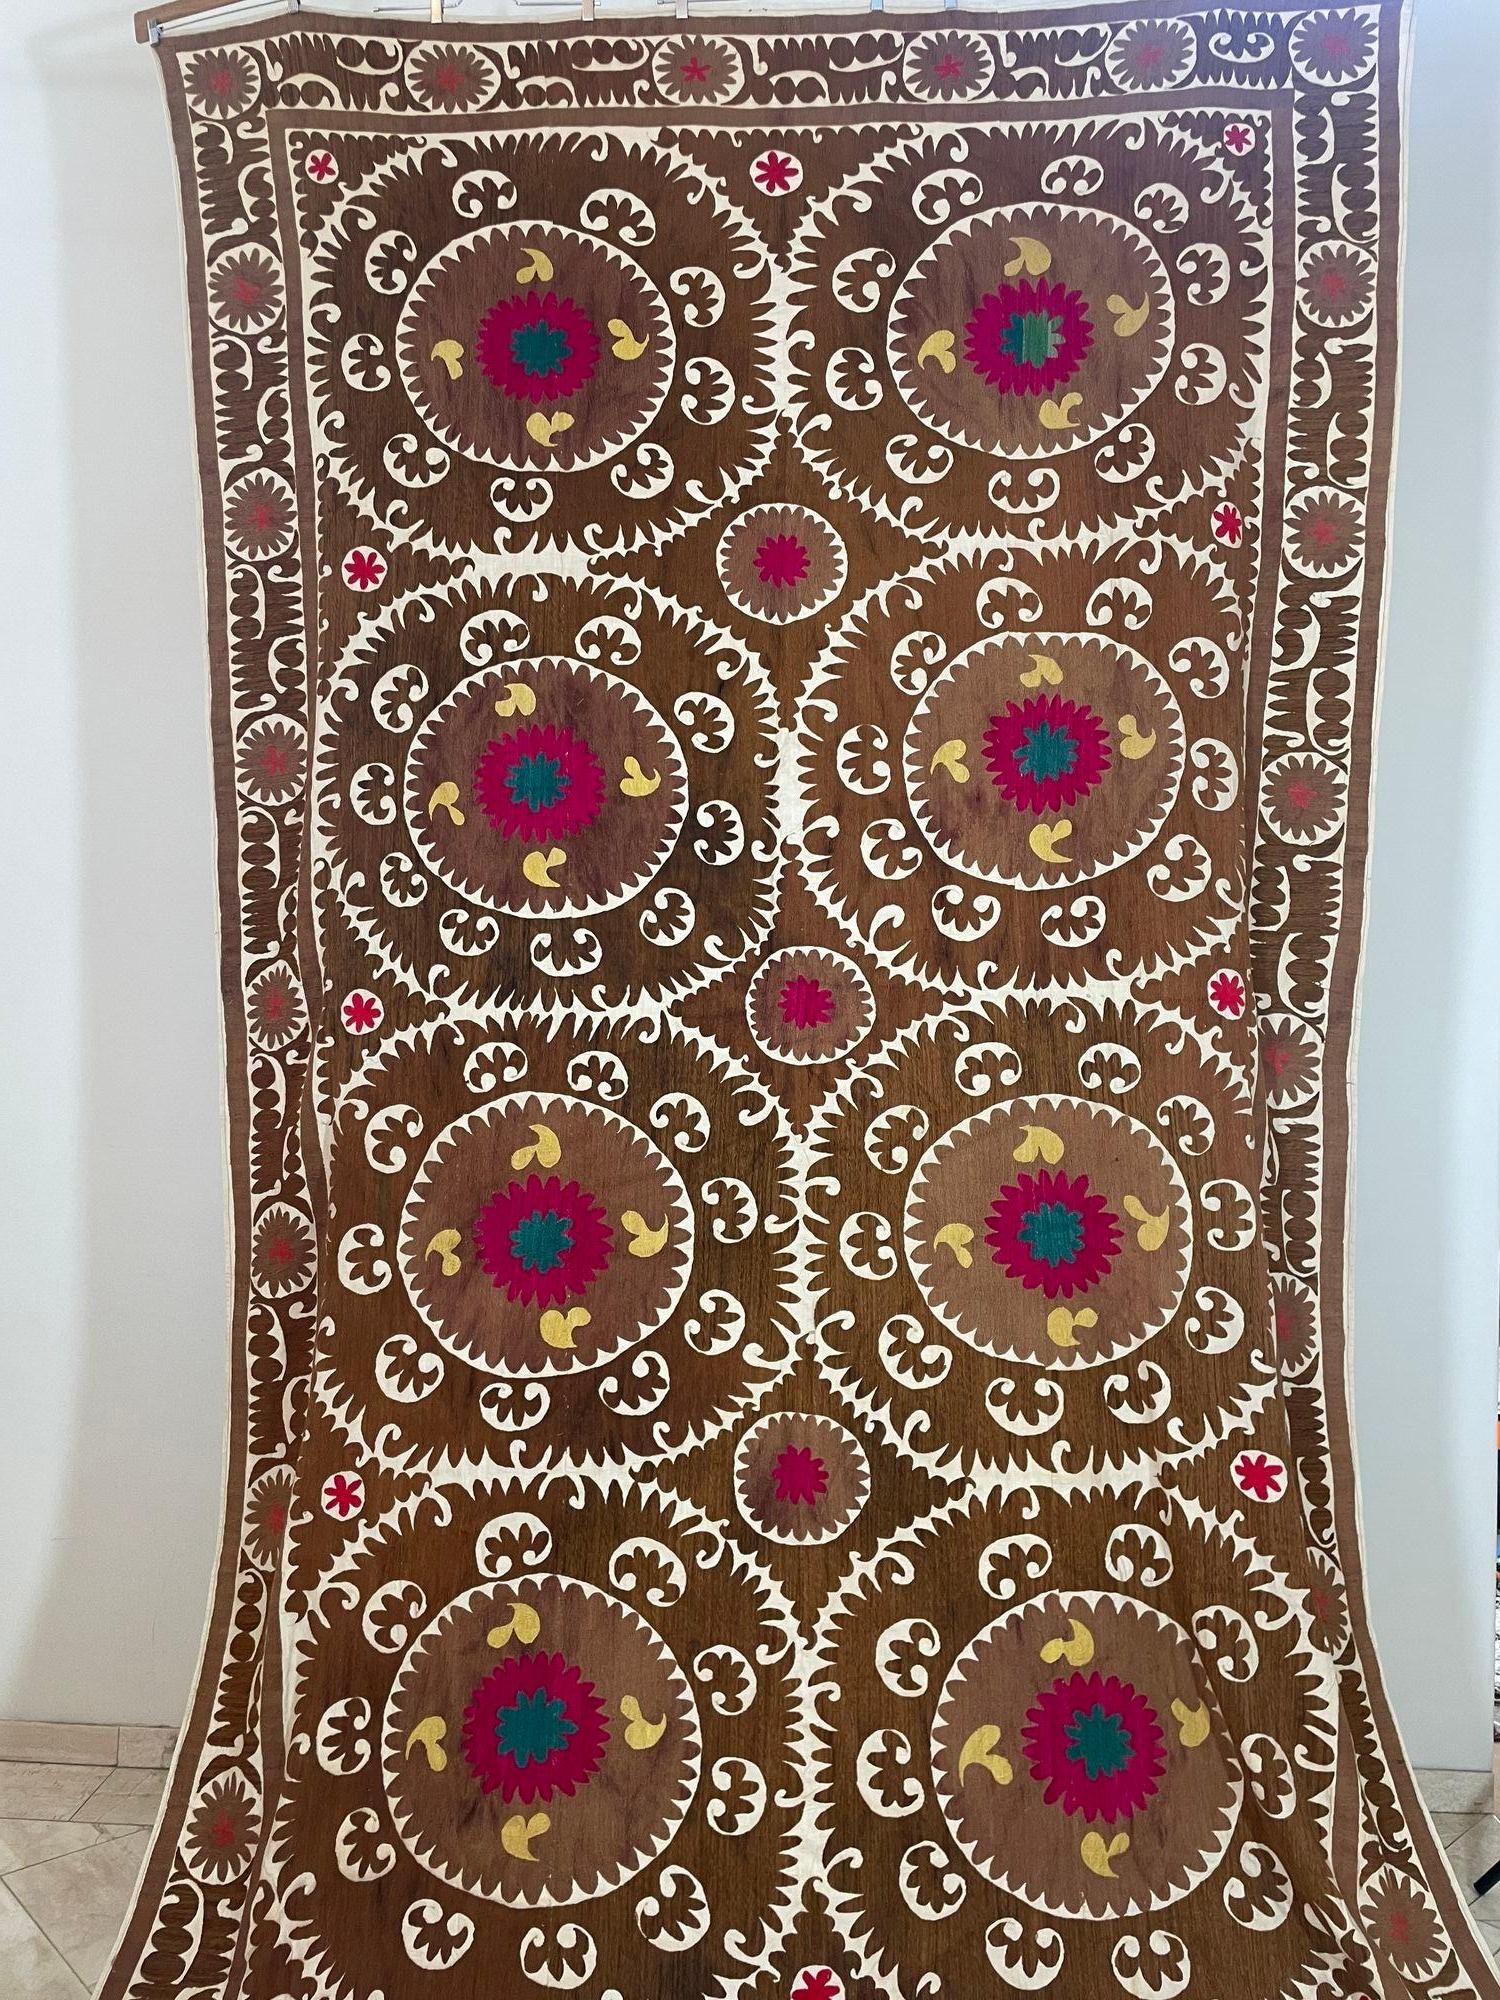 Large Vintage Embroidered Uzbekistan Suzani Tapestry Wall Hanging Brown and Pink.
Very large vintage Turkish Suzani is heavily hand-embroidery with organic brown, pink and yellow colors silk threading.
Beautiful Uzbek hand stitched designs with silk